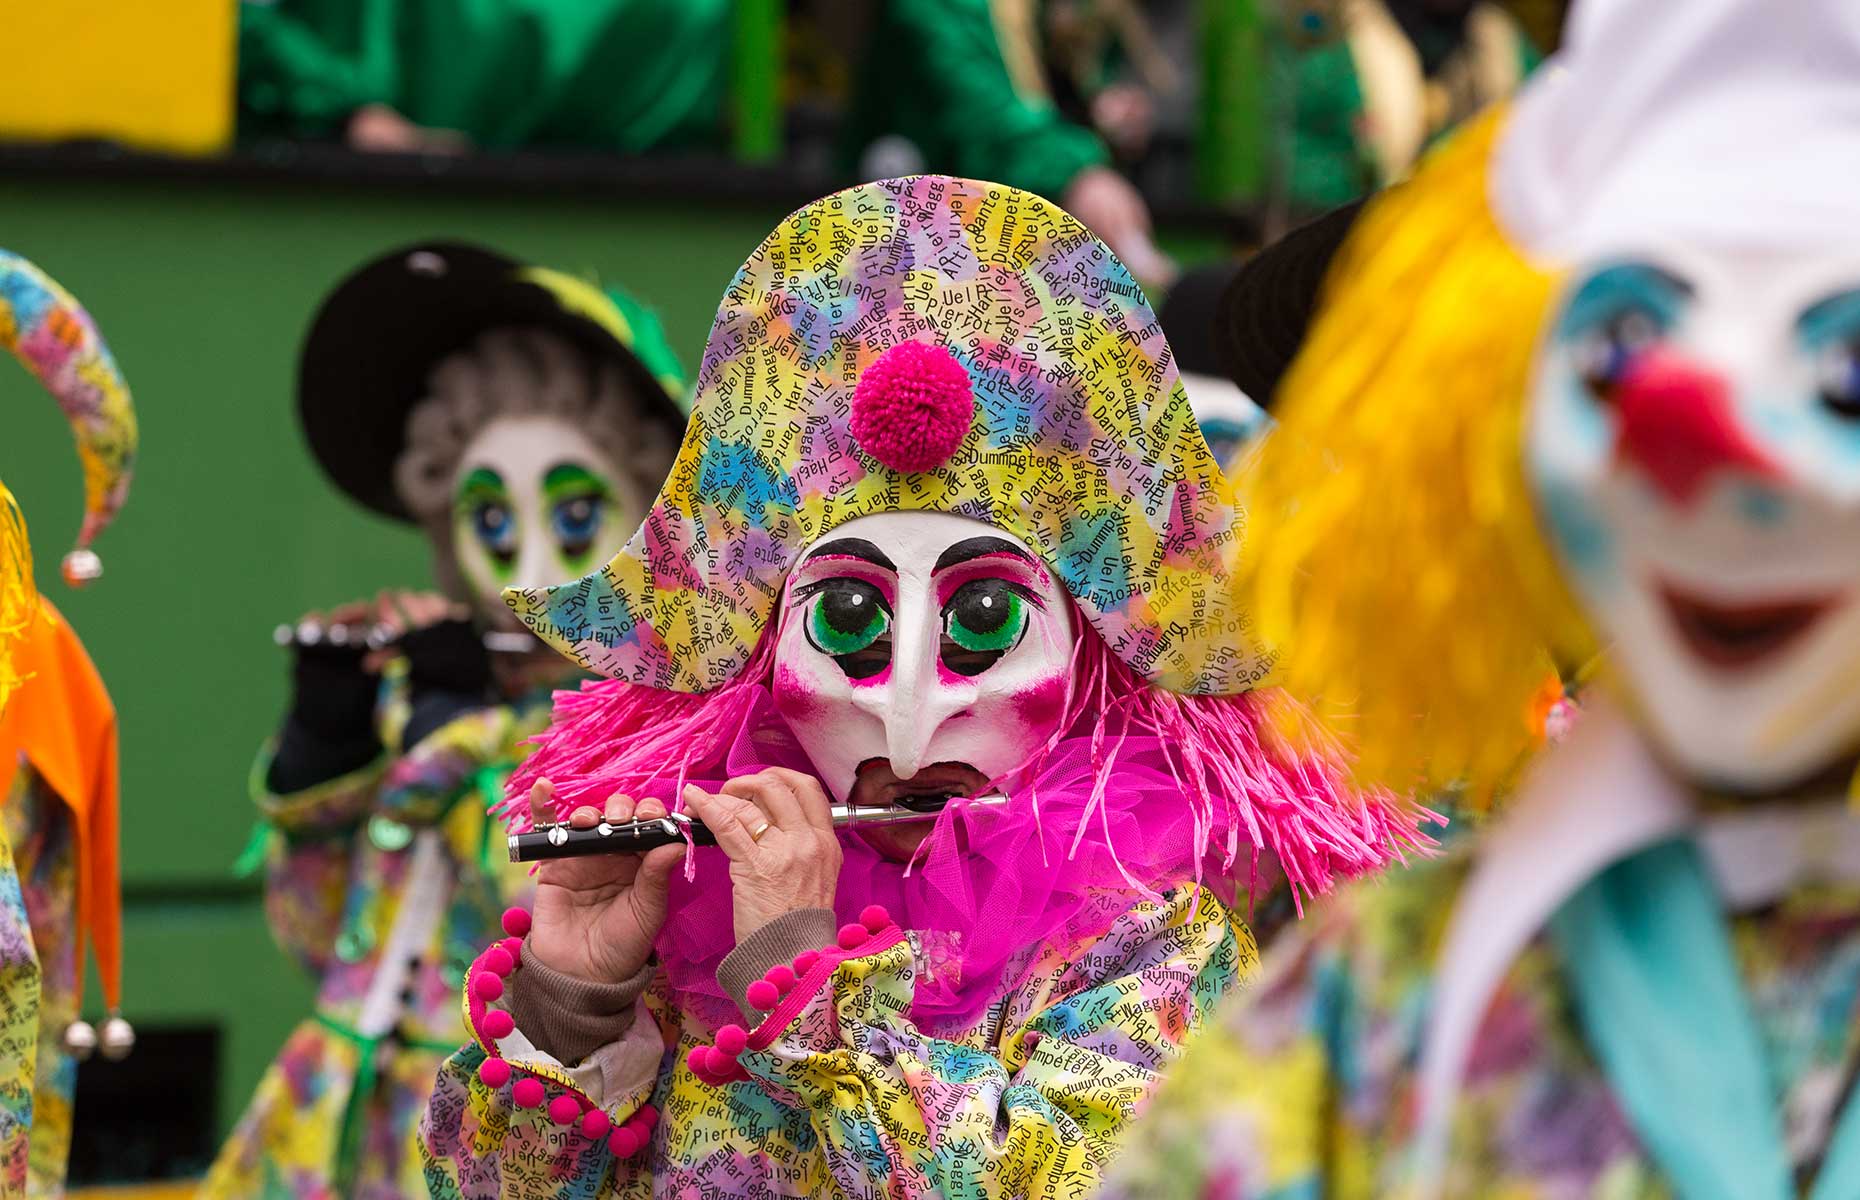 Basel carnival, known as Fasnacht